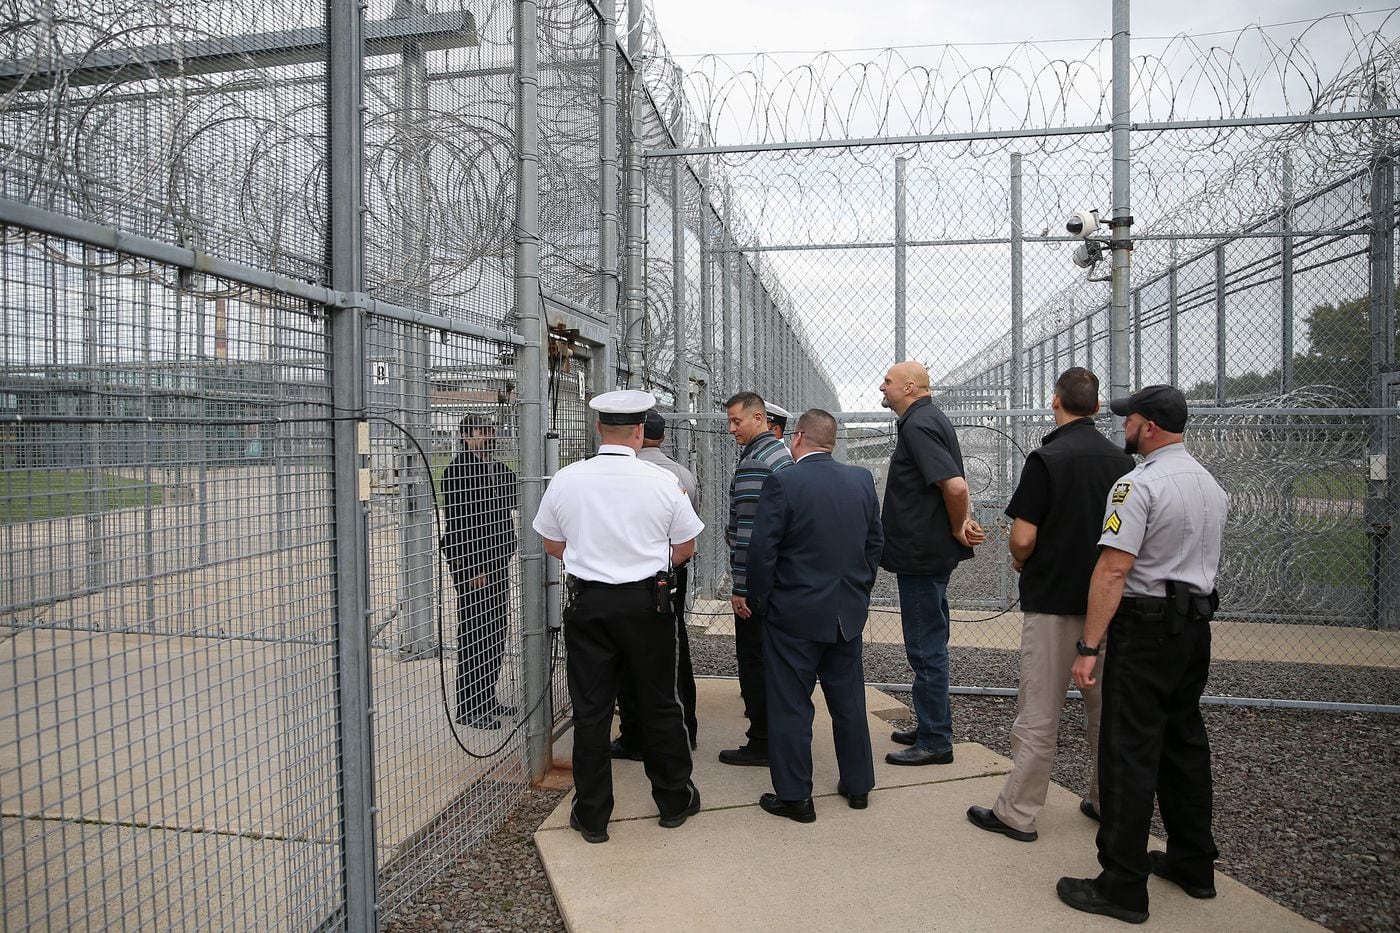 Convincing Pennsylvania prison lifers to apply for clemency is Lt. Gov